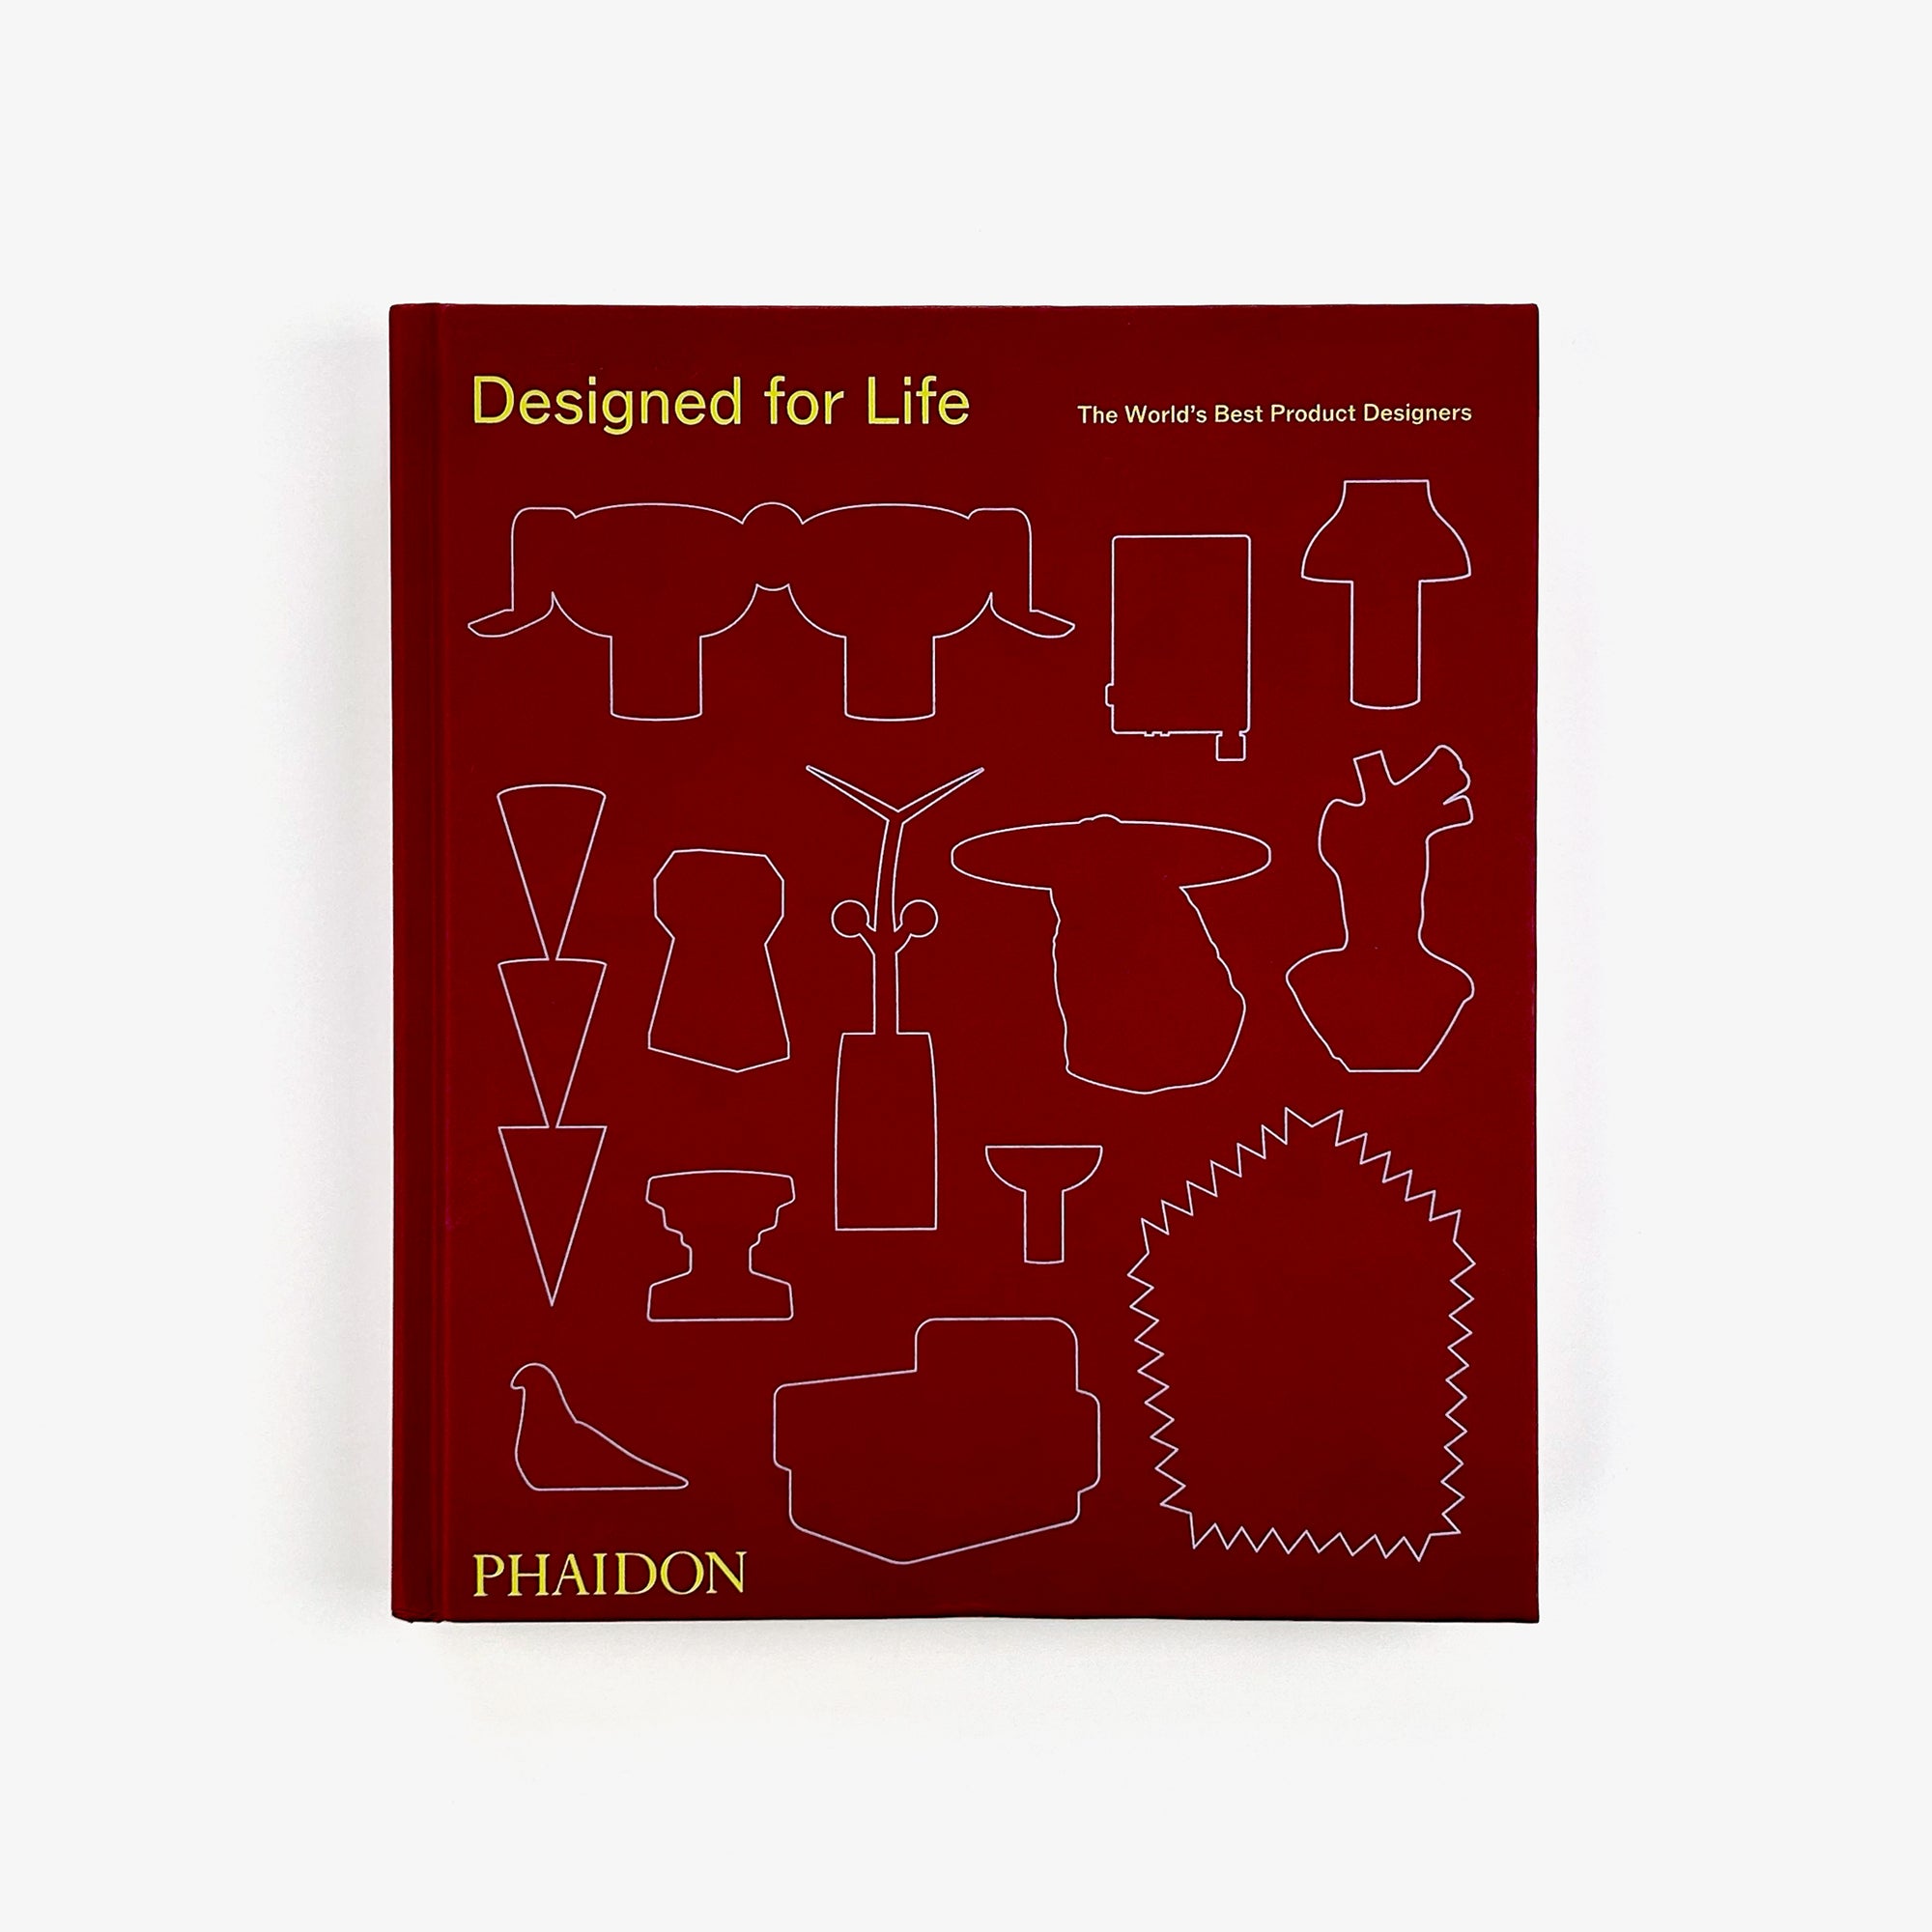 Designed for Life: The World's Best Product Designers